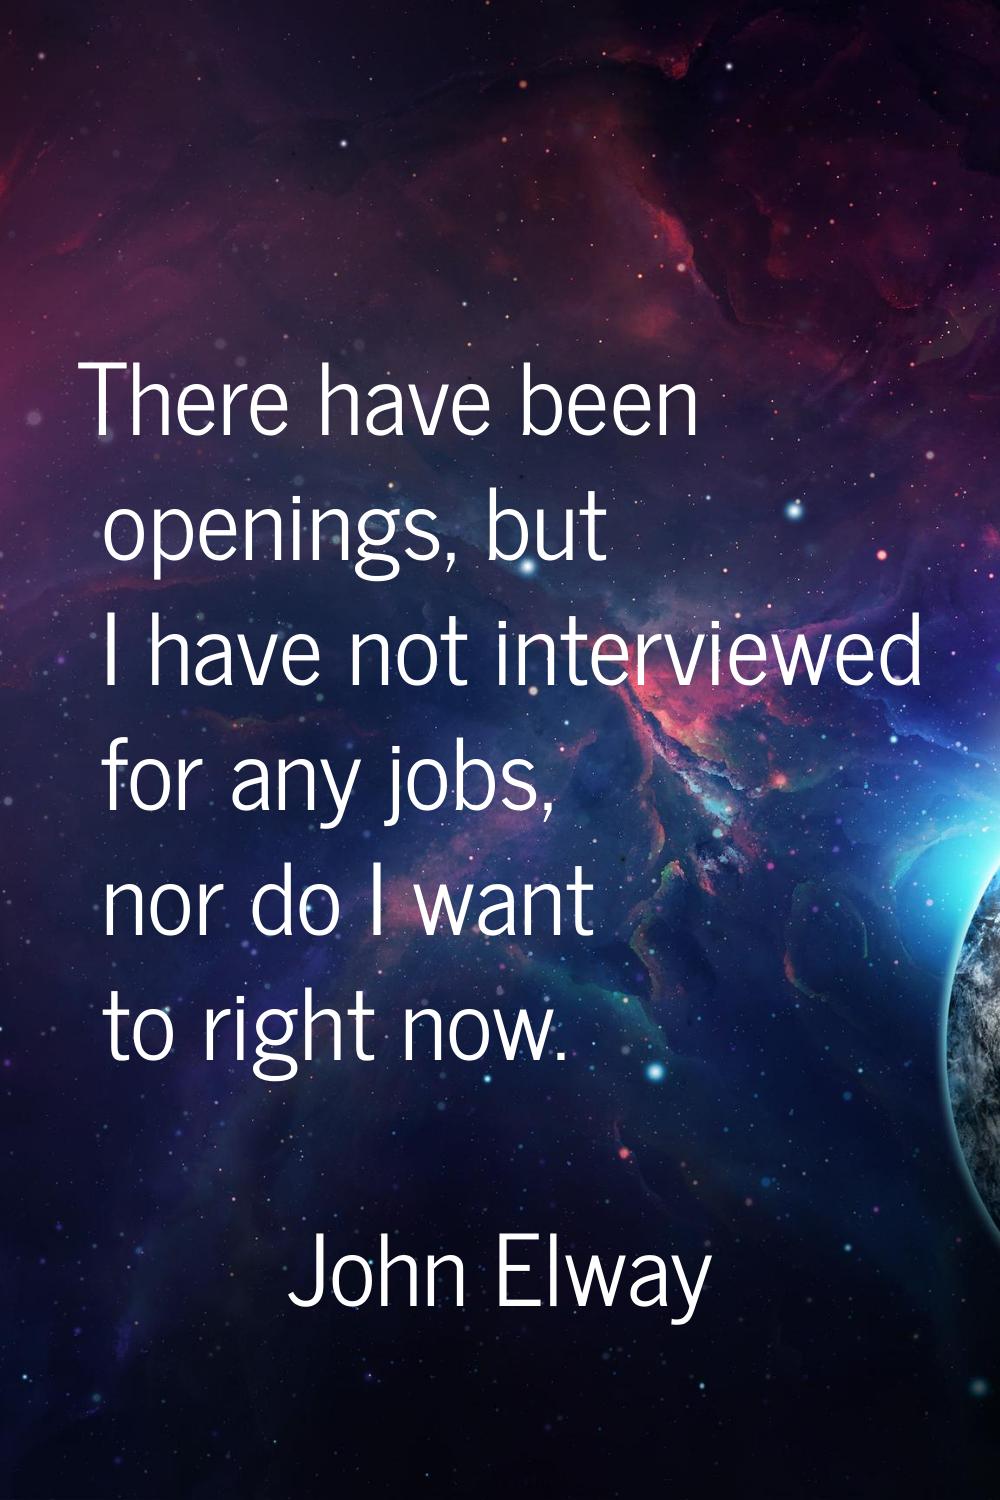 There have been openings, but I have not interviewed for any jobs, nor do I want to right now.